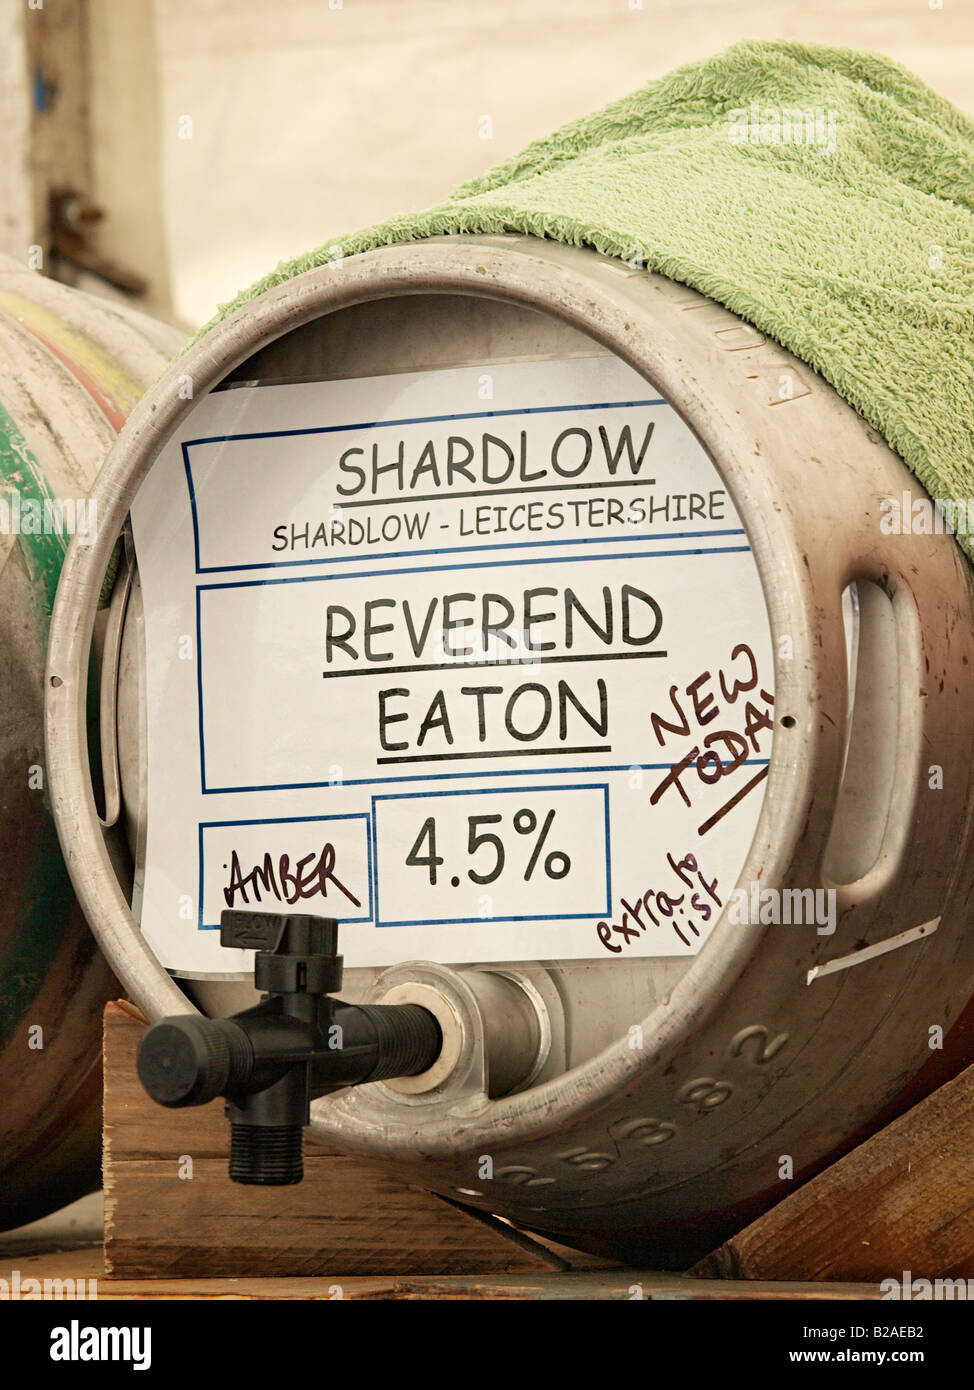 RACKED BARREL OF REVEREND EATON BITTER BEER FROM SHARDLOW BREWERY, AT  BEER FESTIVAL AT SHERINGHAM NORTH NORFOLK ENGLAND UK Stock Photo